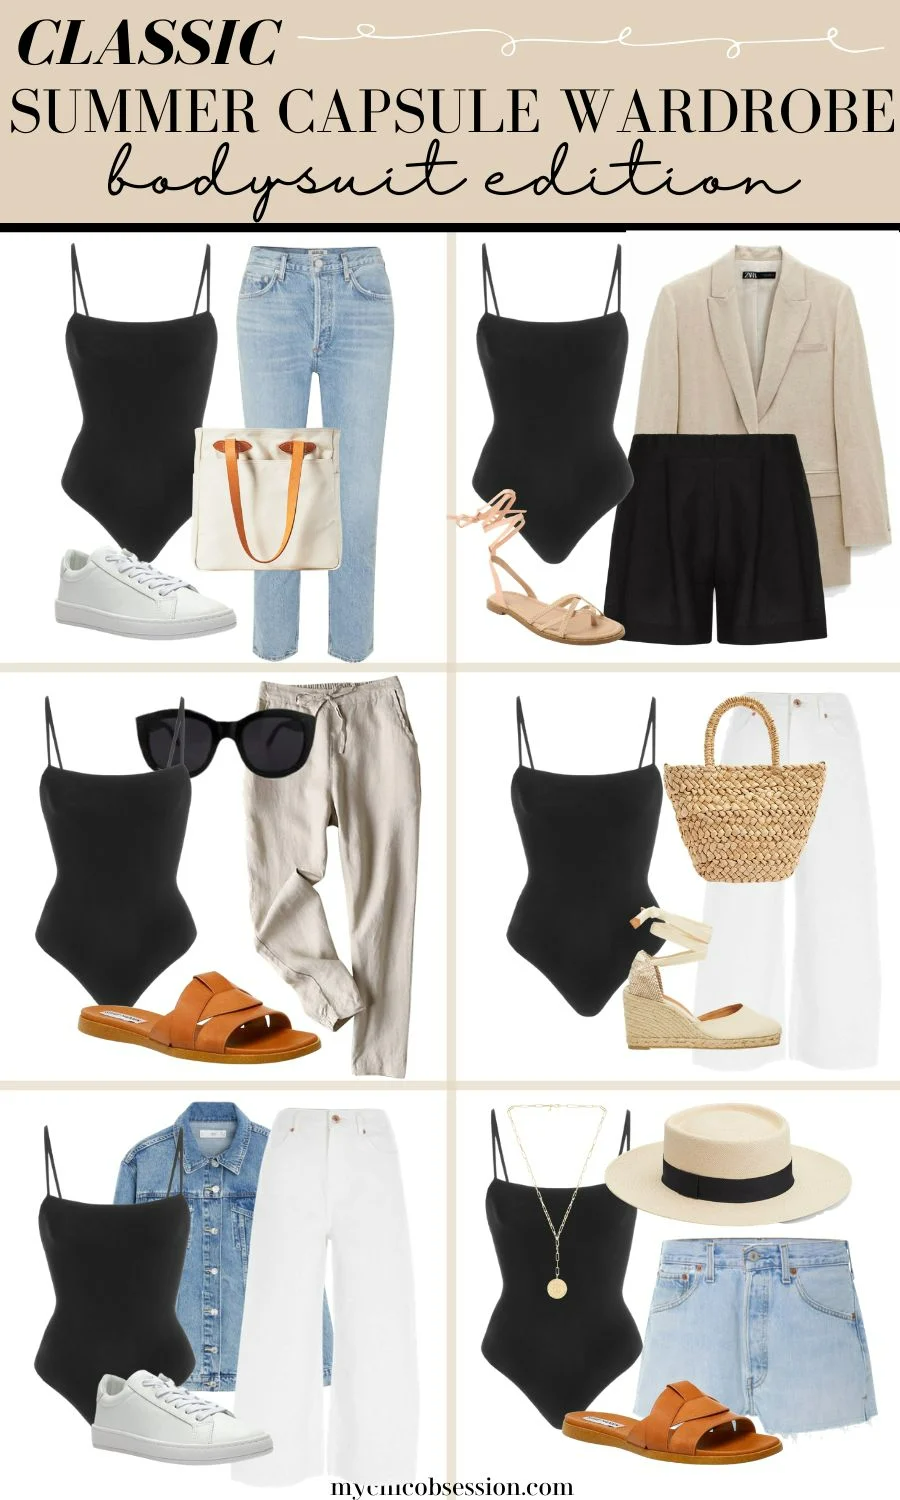 A Classic Capsule Wardrobe for Summer